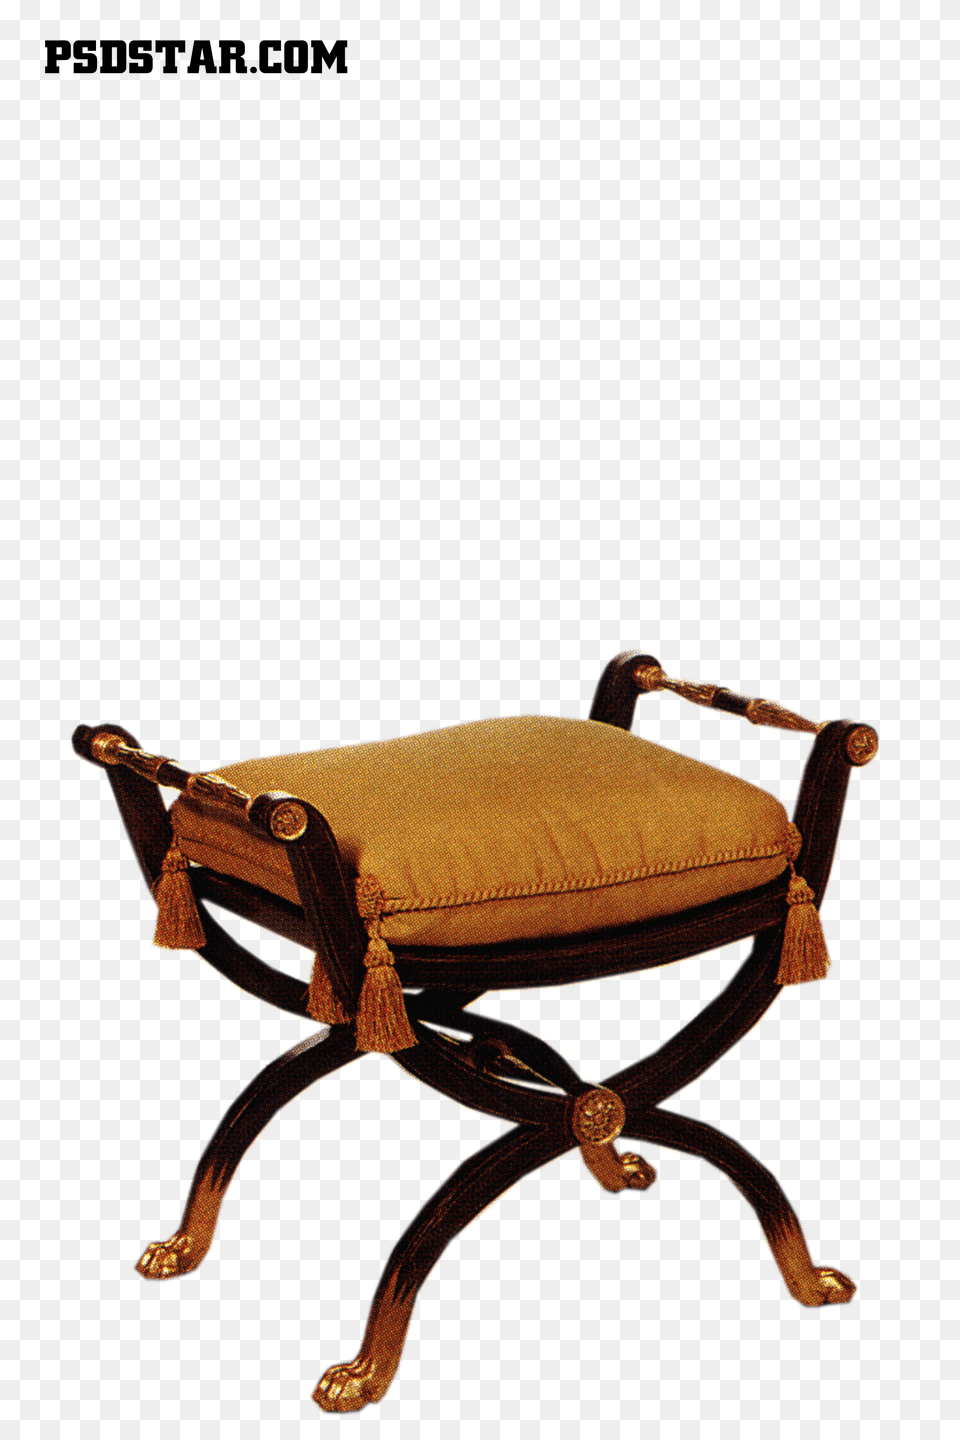 Hd Chair High Resolution For Photoshop, Cushion, Furniture, Home Decor, Armchair Png Image